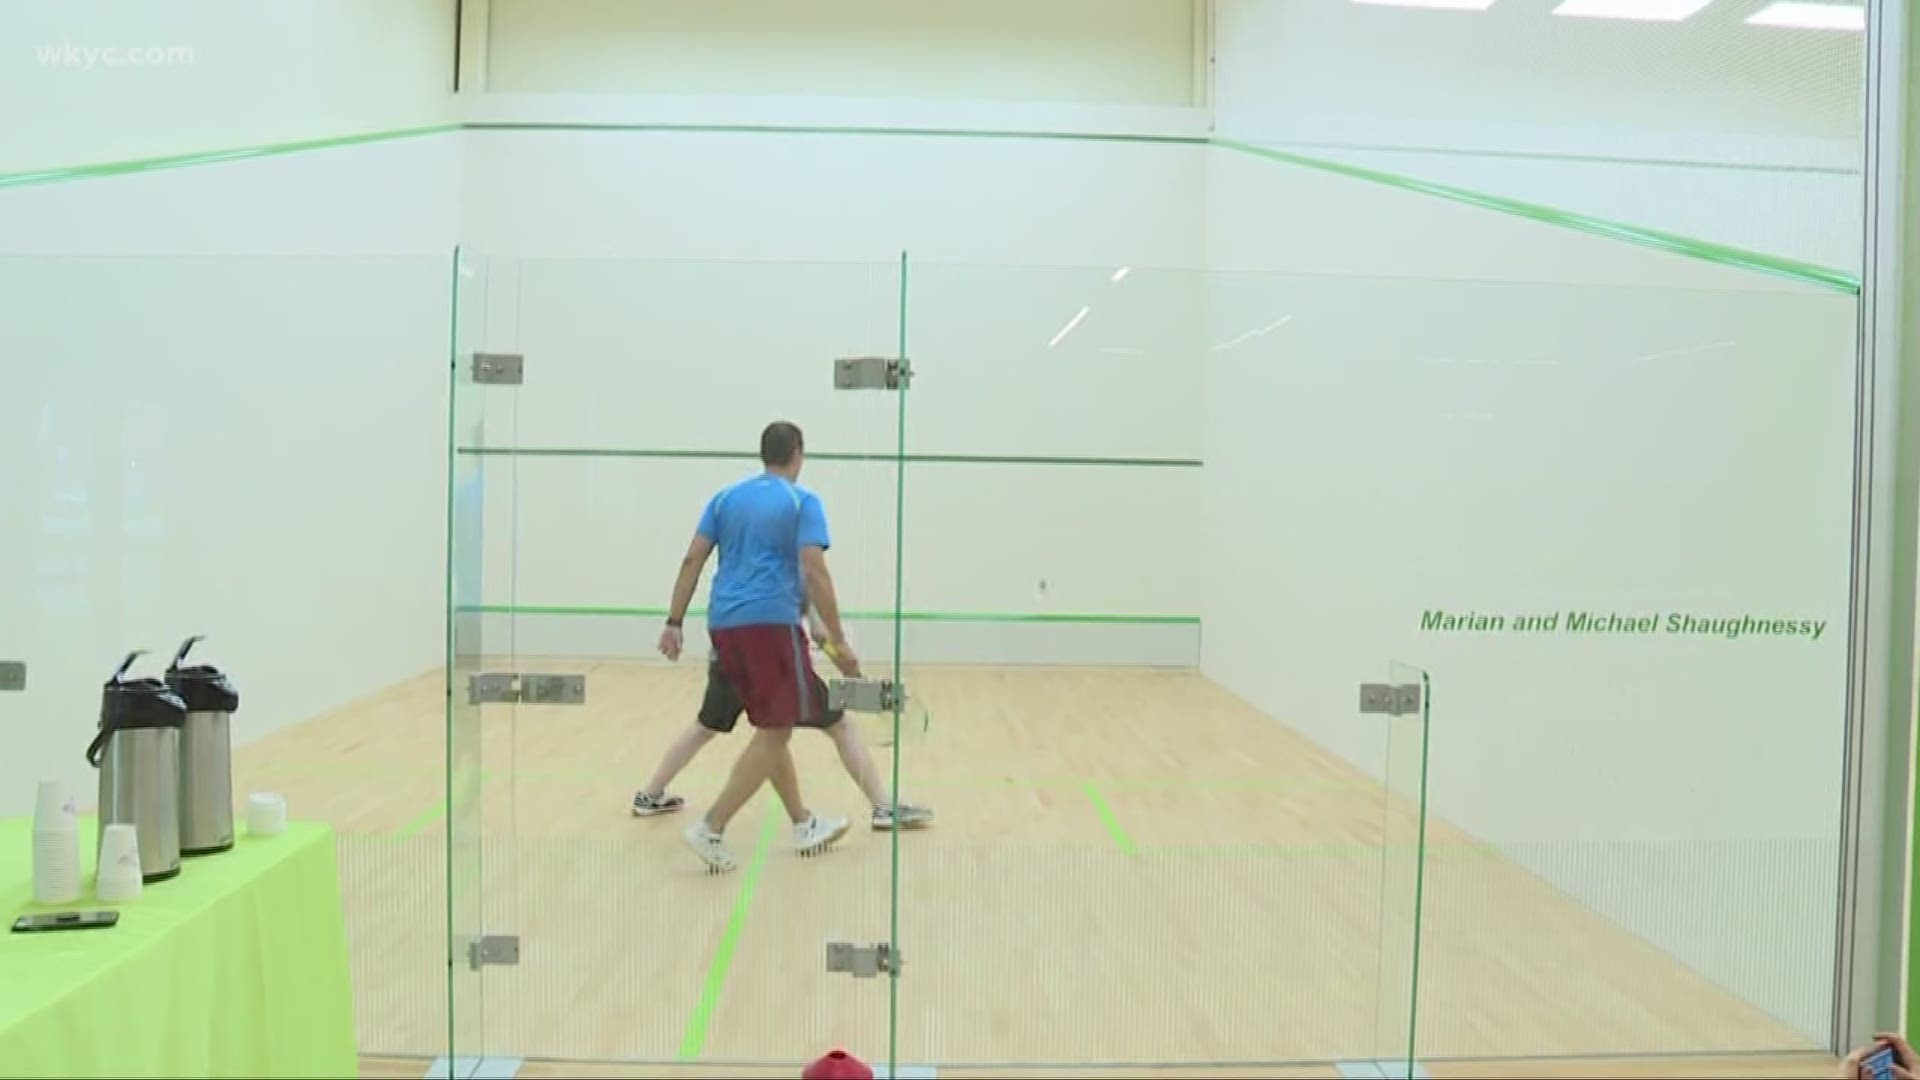 State-of-the-art squash center opens in Cleveland